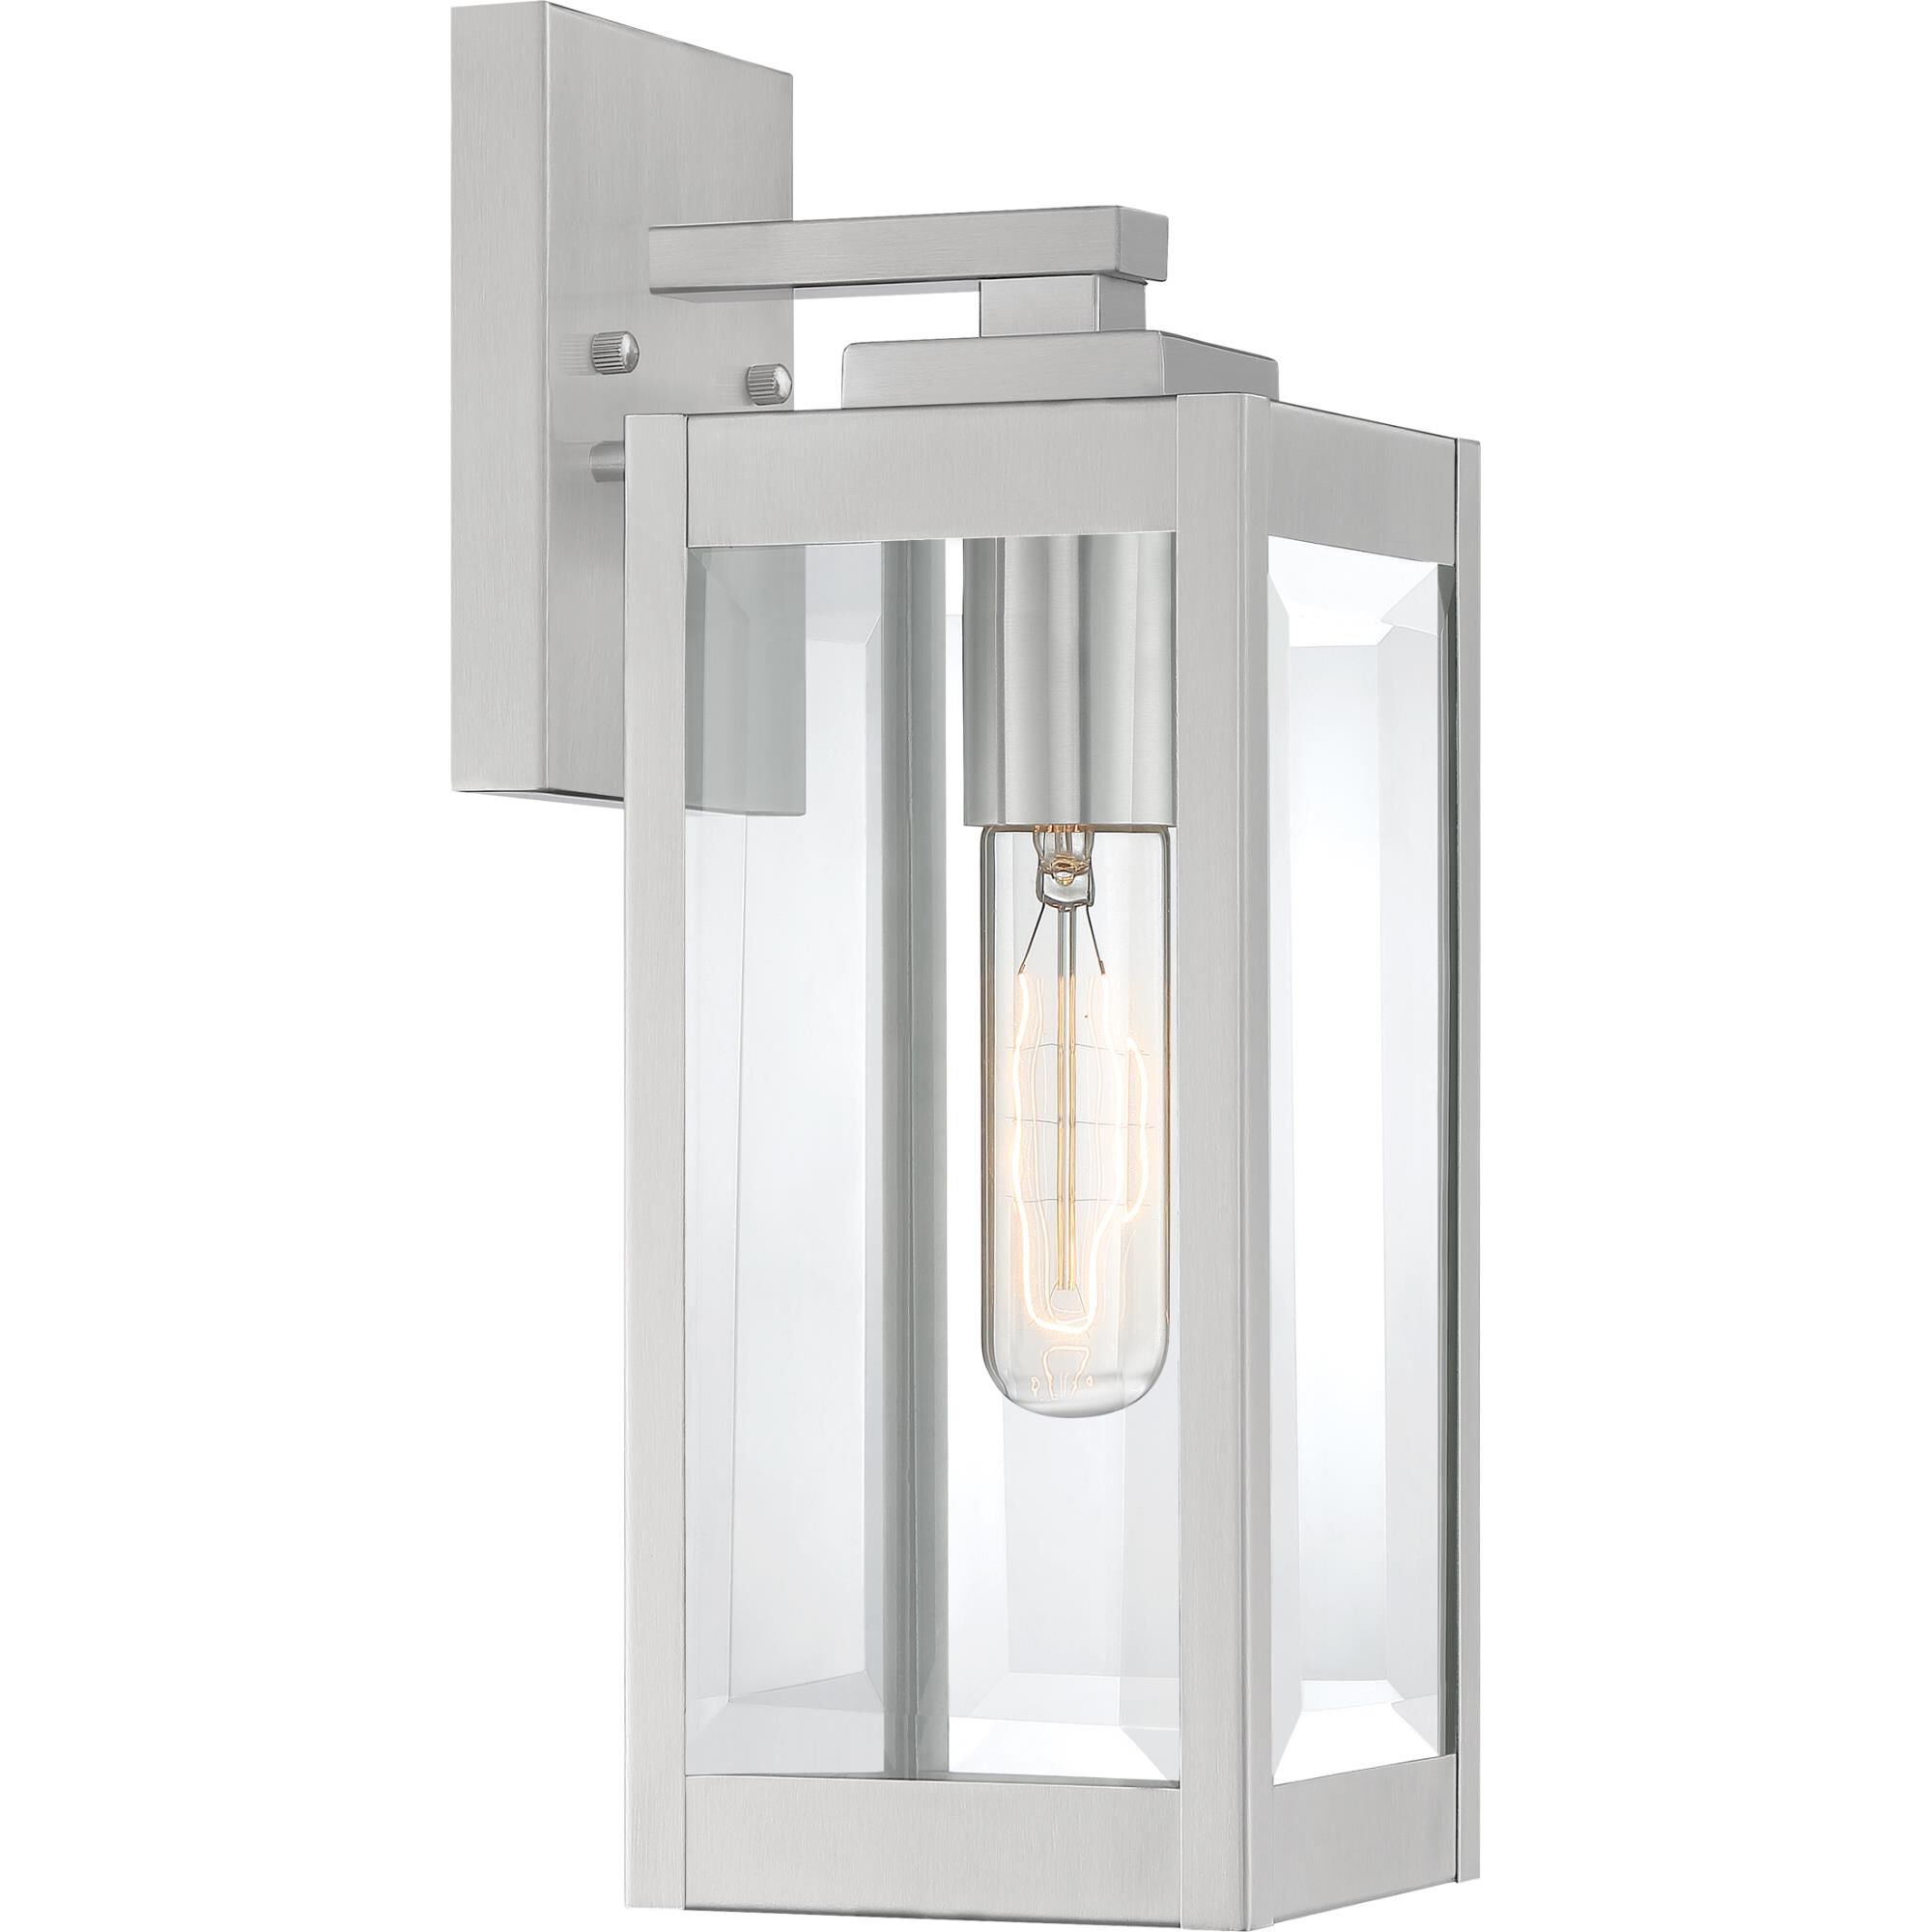 Photos - Chandelier / Lamp Quoizel Westover 14 Inch Tall Outdoor Wall Light Westover - WVR8405SS - Tr 